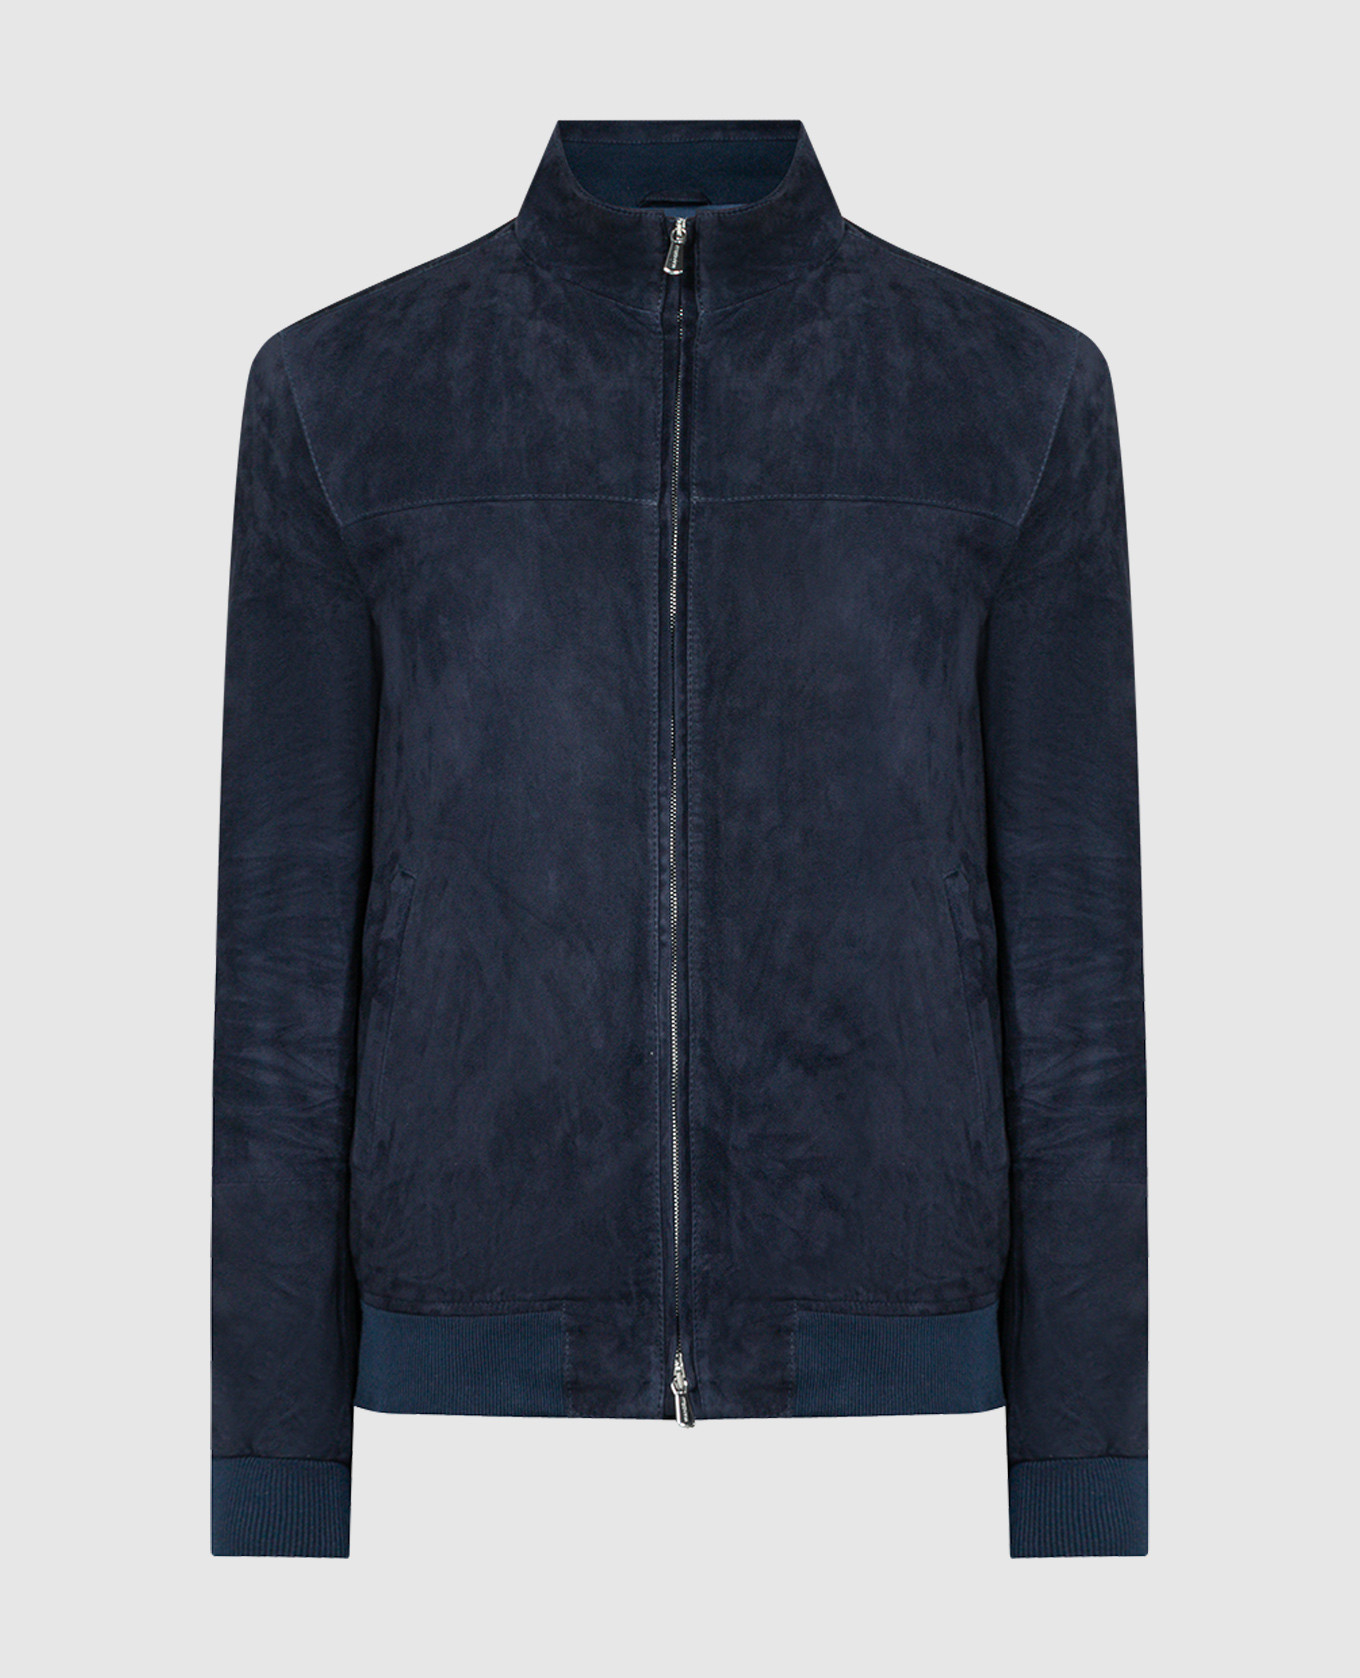 Blue suede jacket with logo